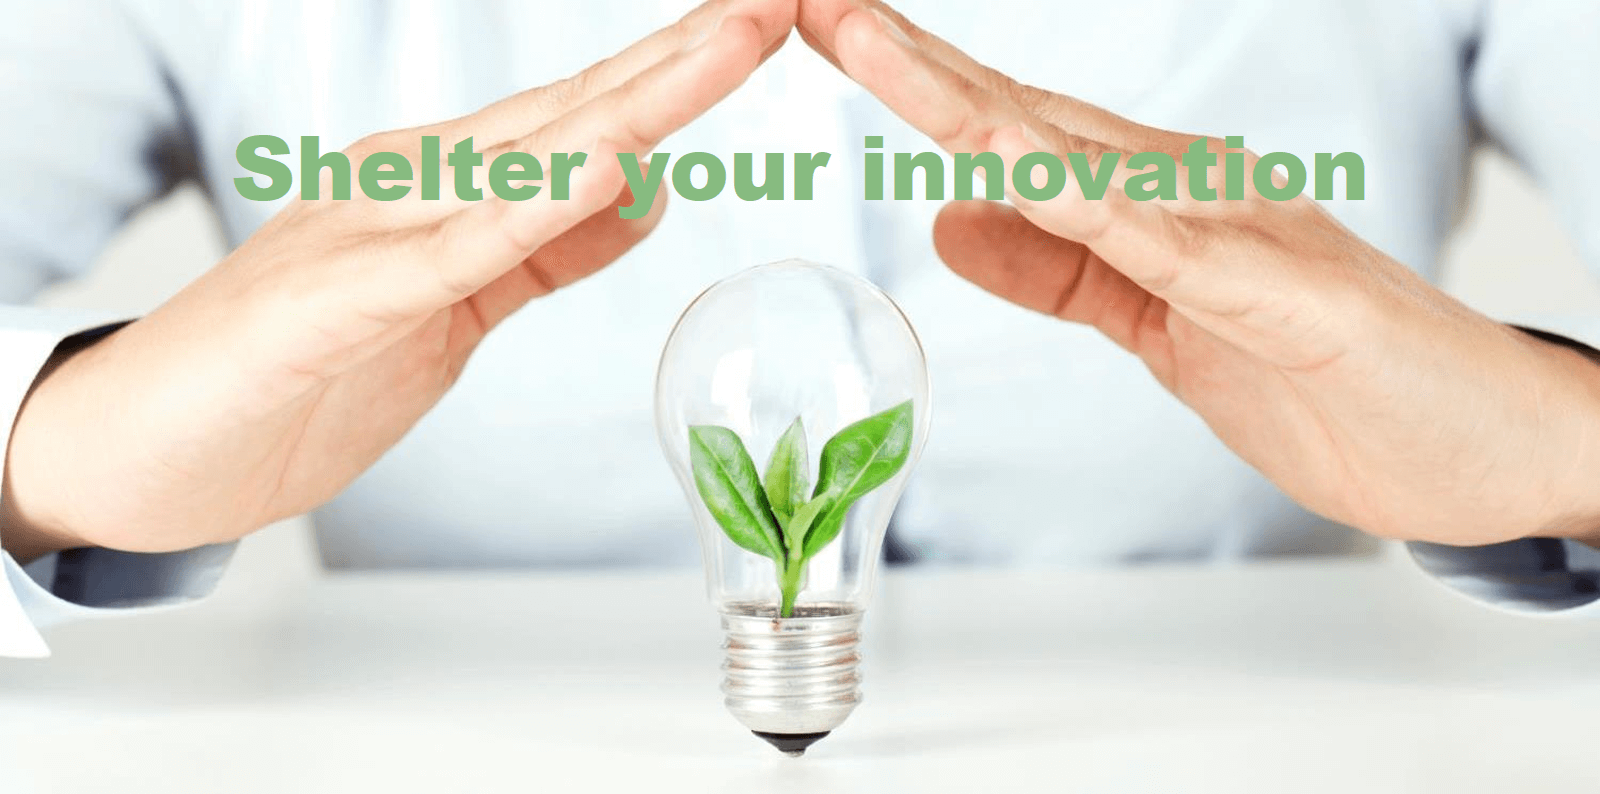 B2B-Leaders-Should-Shelter-Their-New-Product-Innovation-Teams